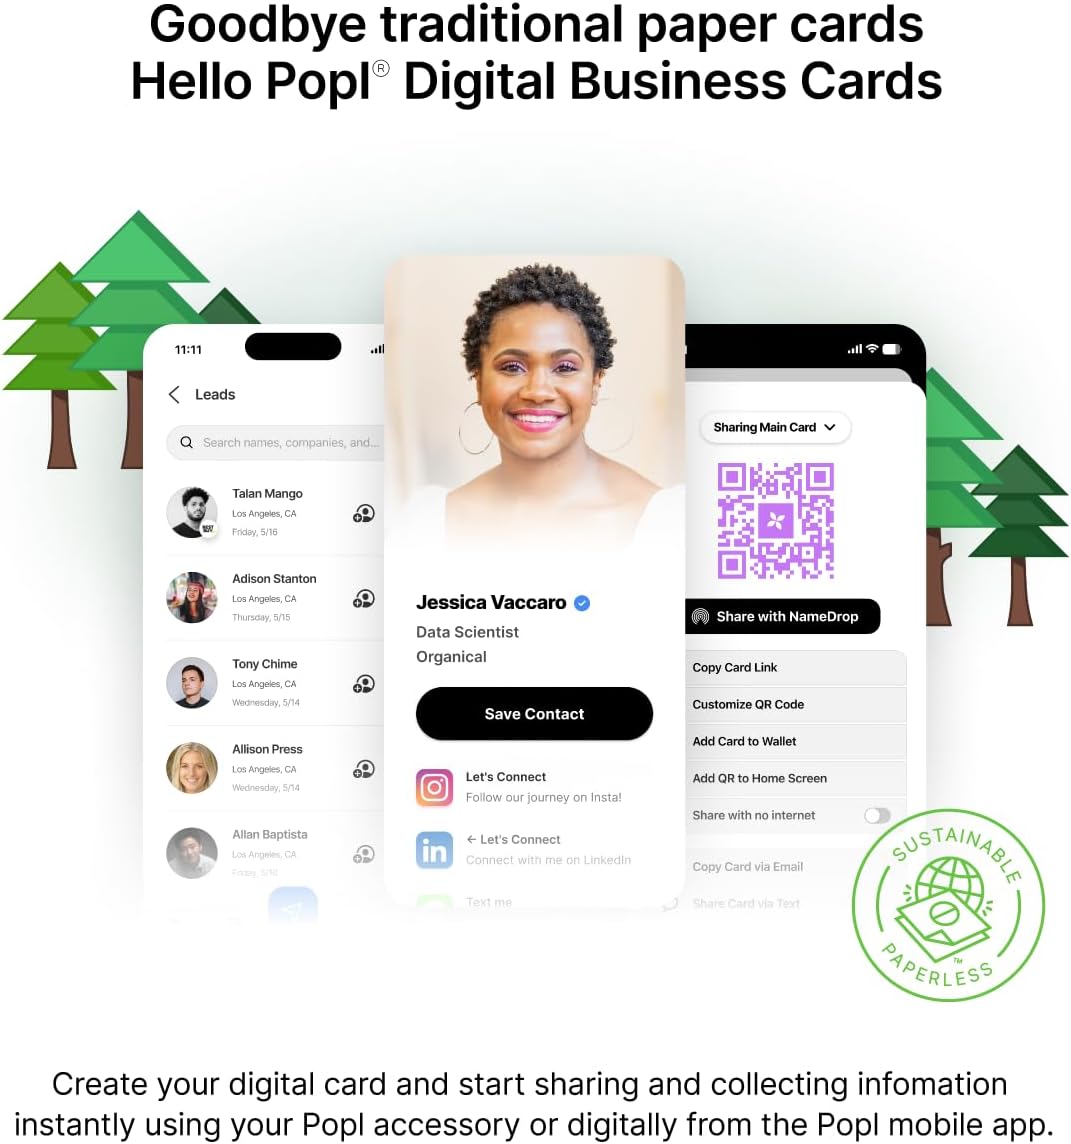 Popl Digital Business Card - The Ultimate Networking Tool